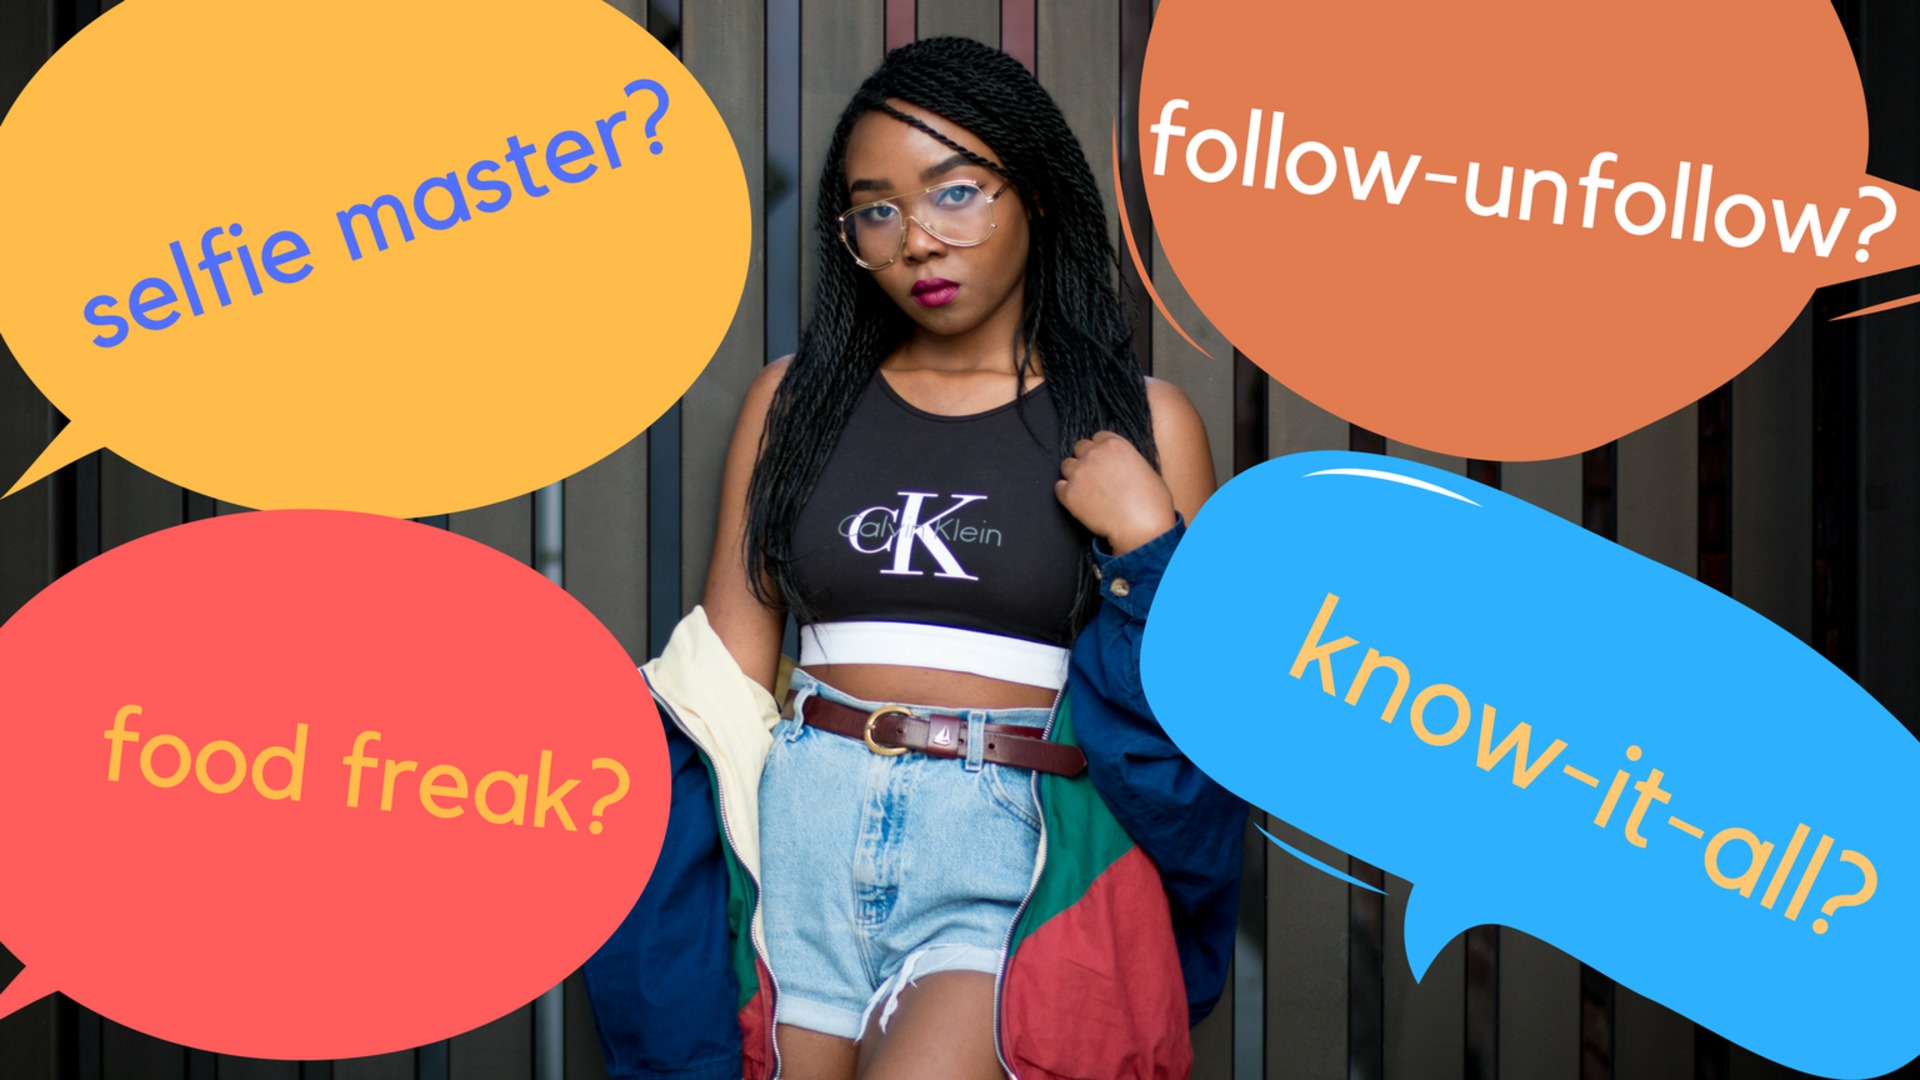 What kind of influencer are you? image